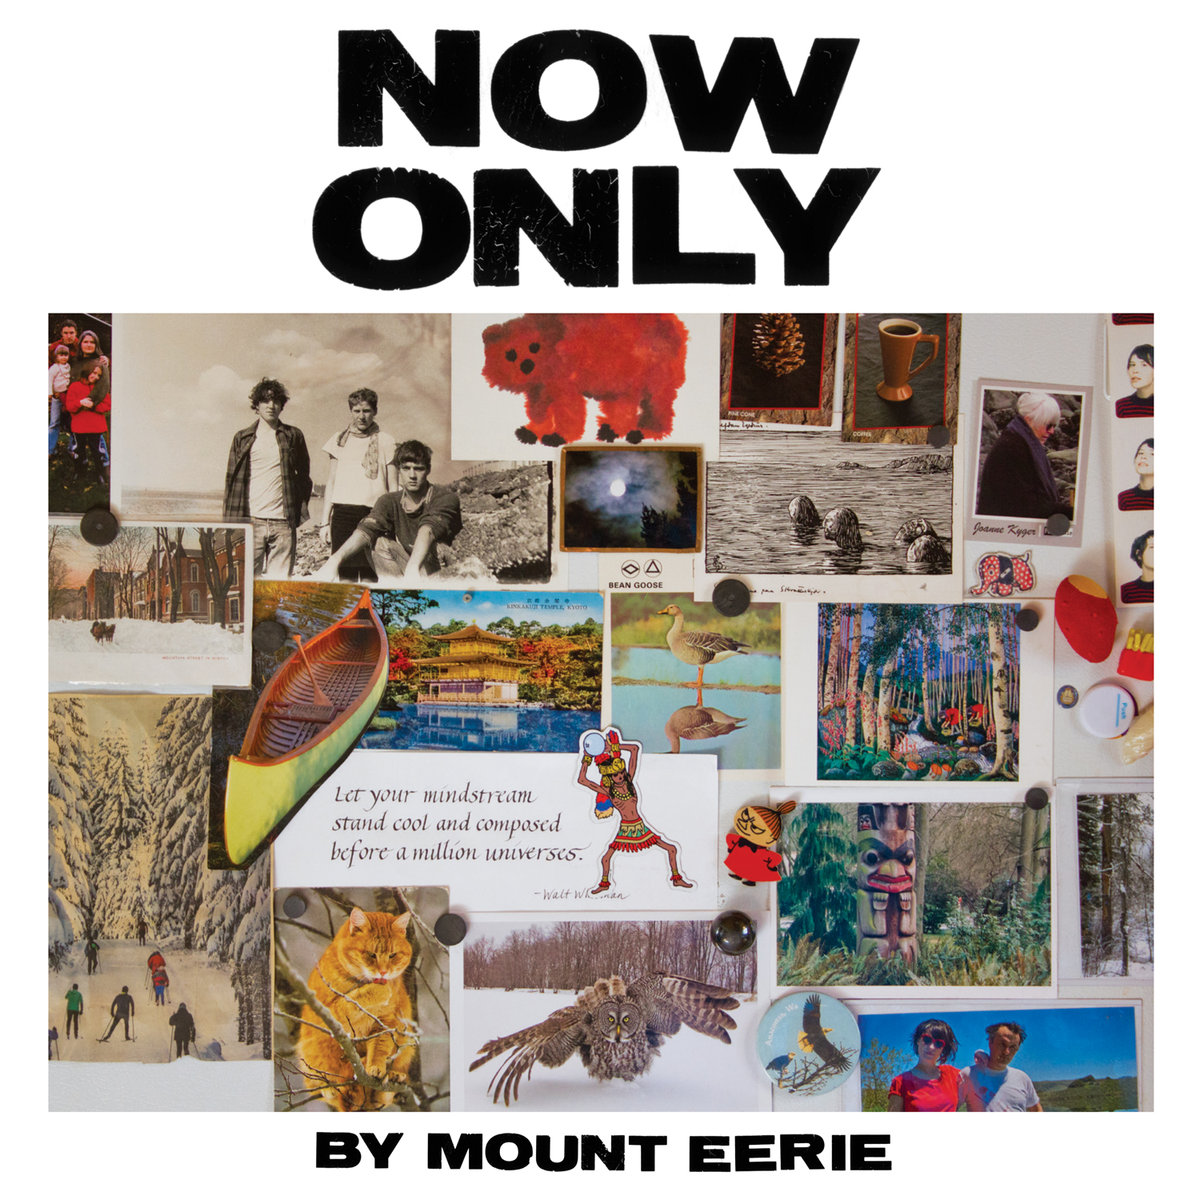 Northern Transmissions review of 'Now Only' by Mount Eerie